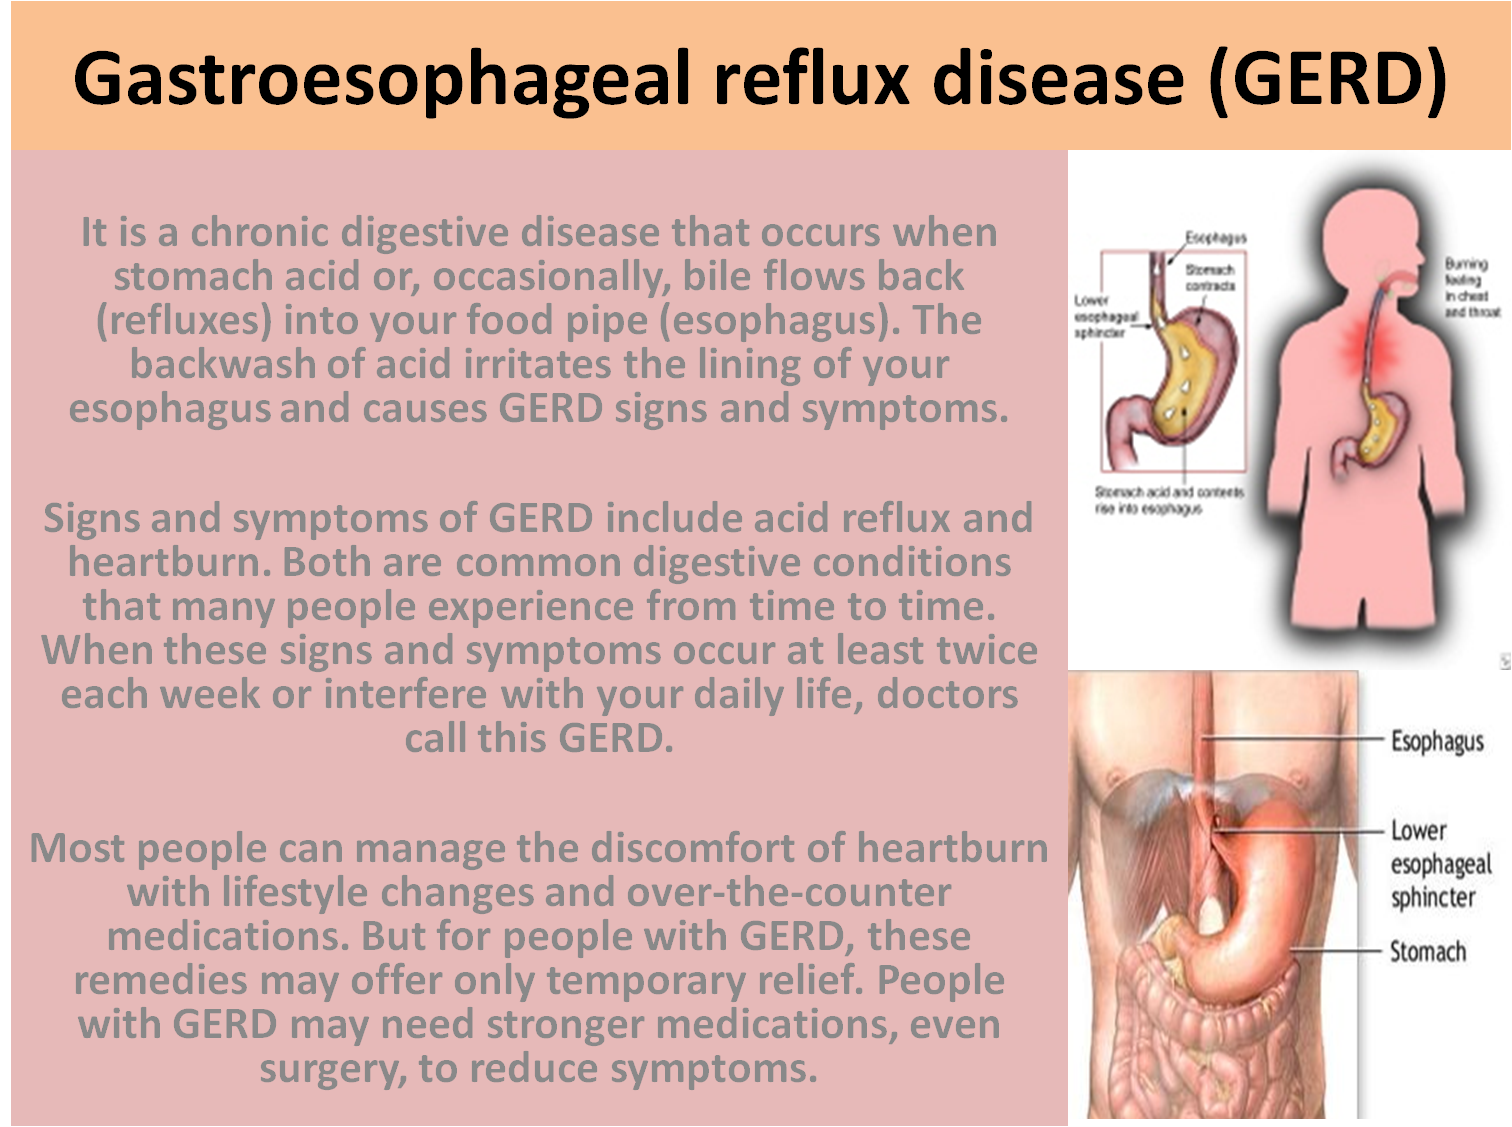  muscles especially Gastroesophageal reflux disease or acid reflux